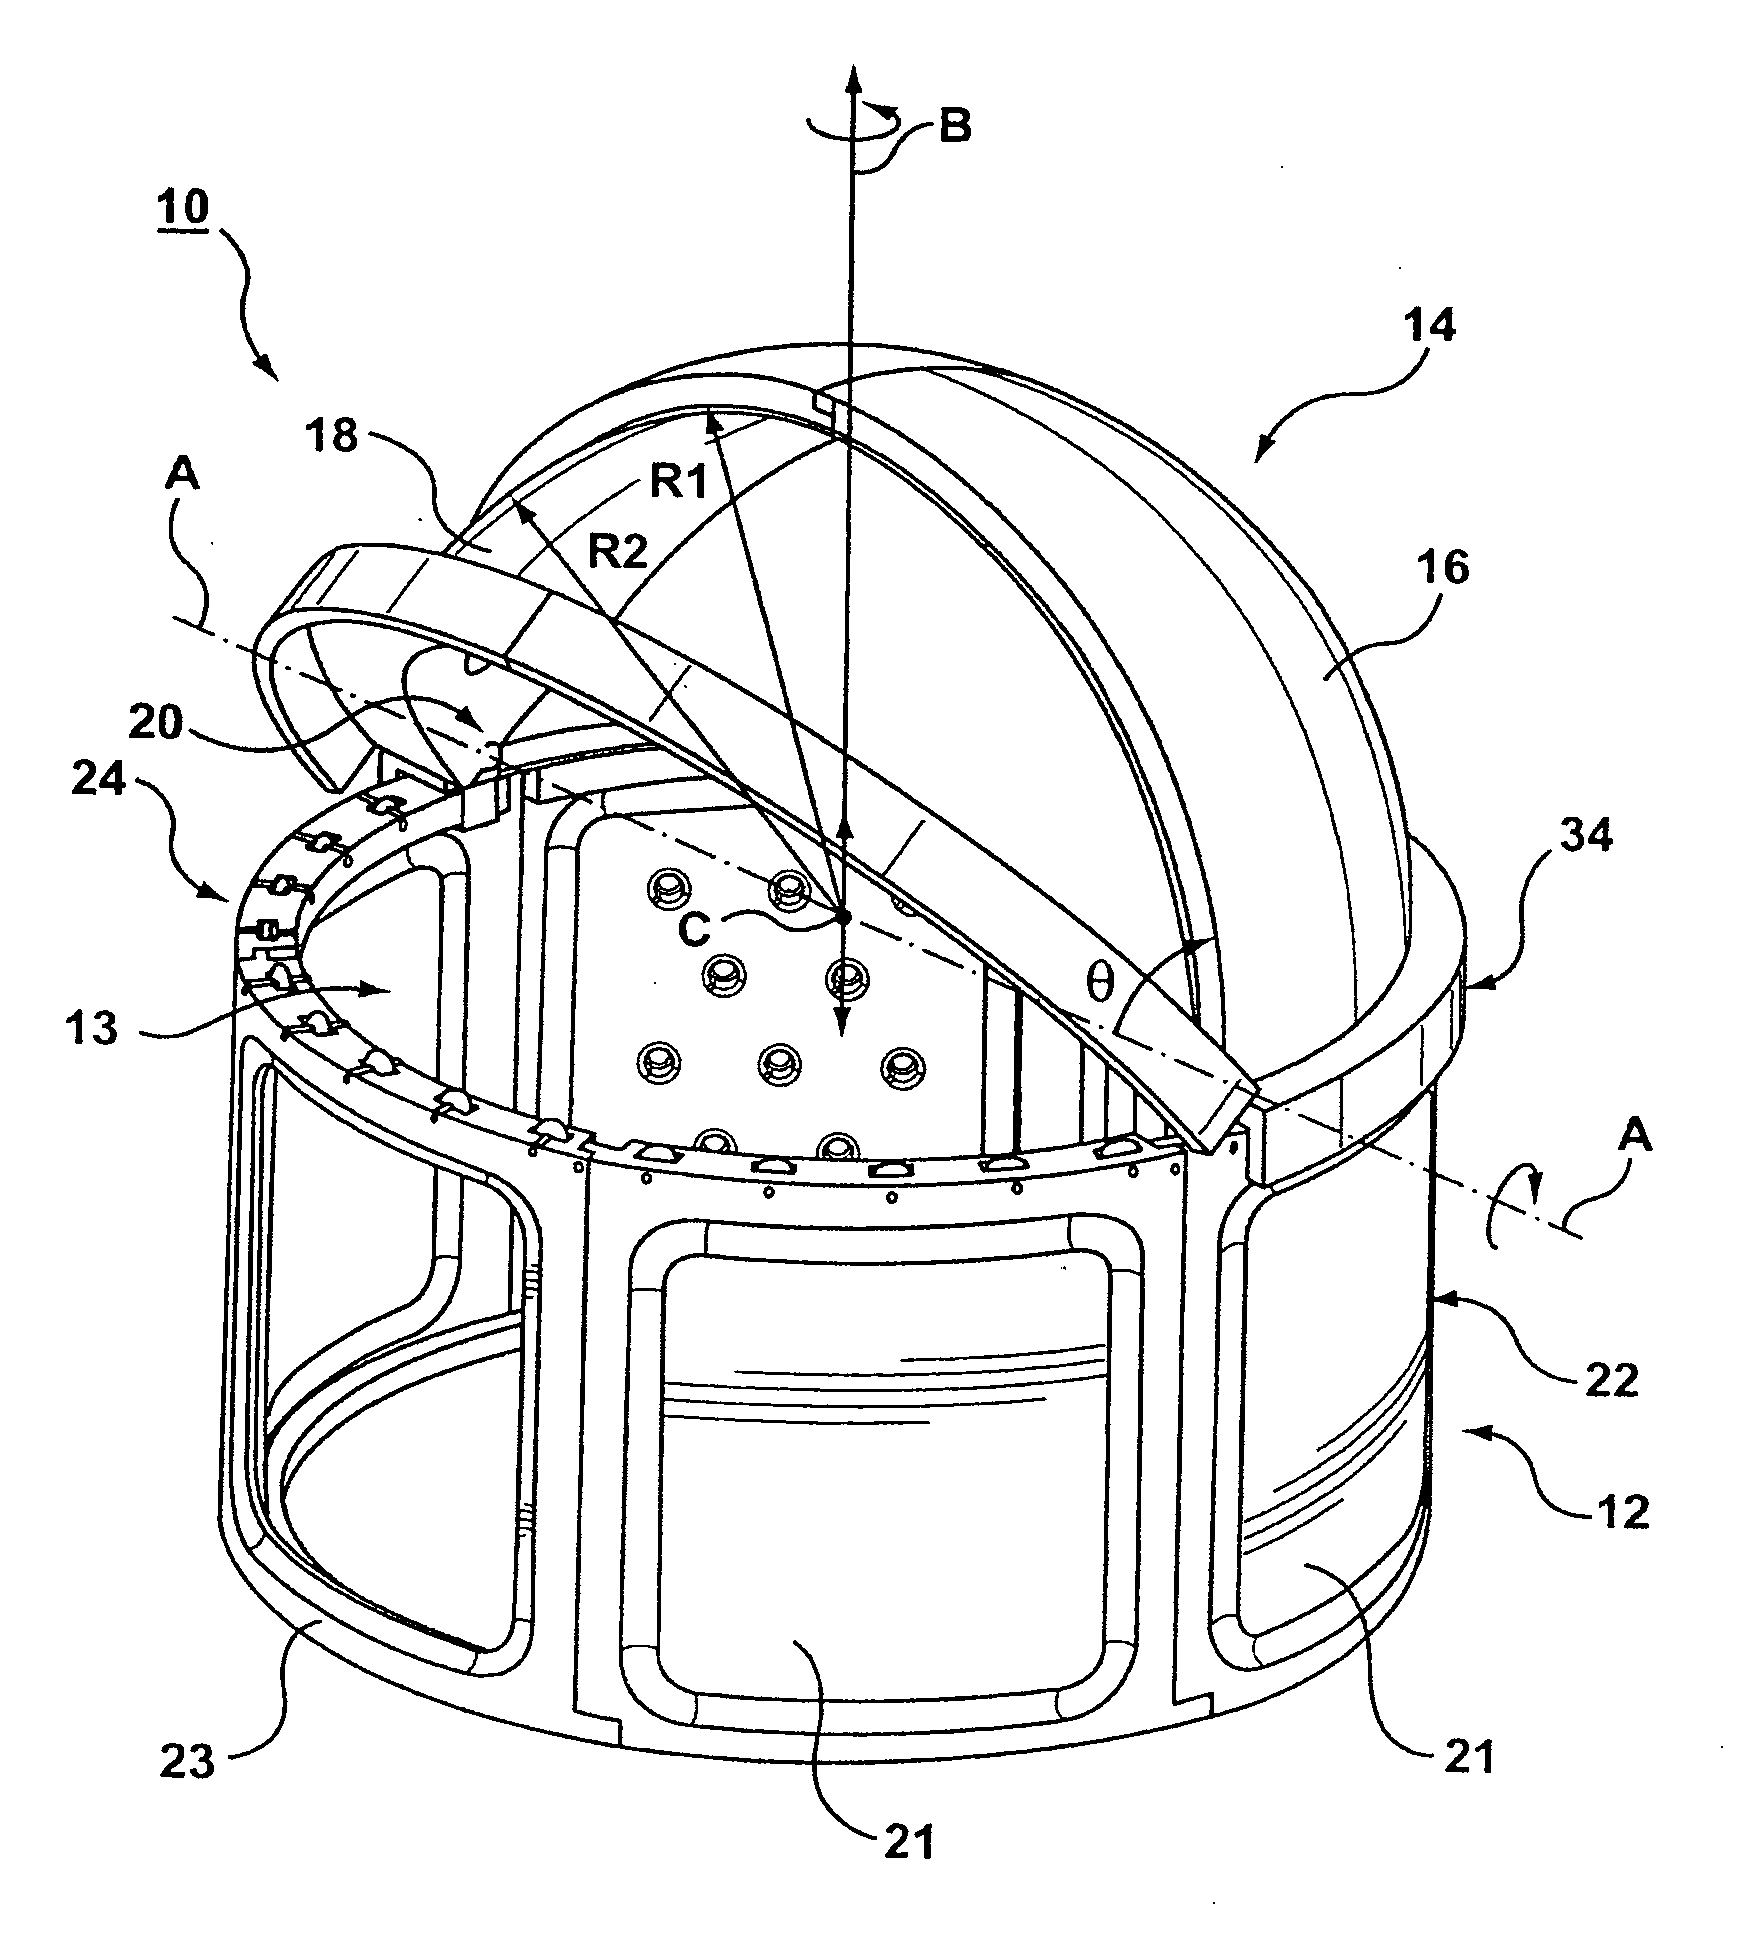 Personal observatory structure having pivotally connected dome segments